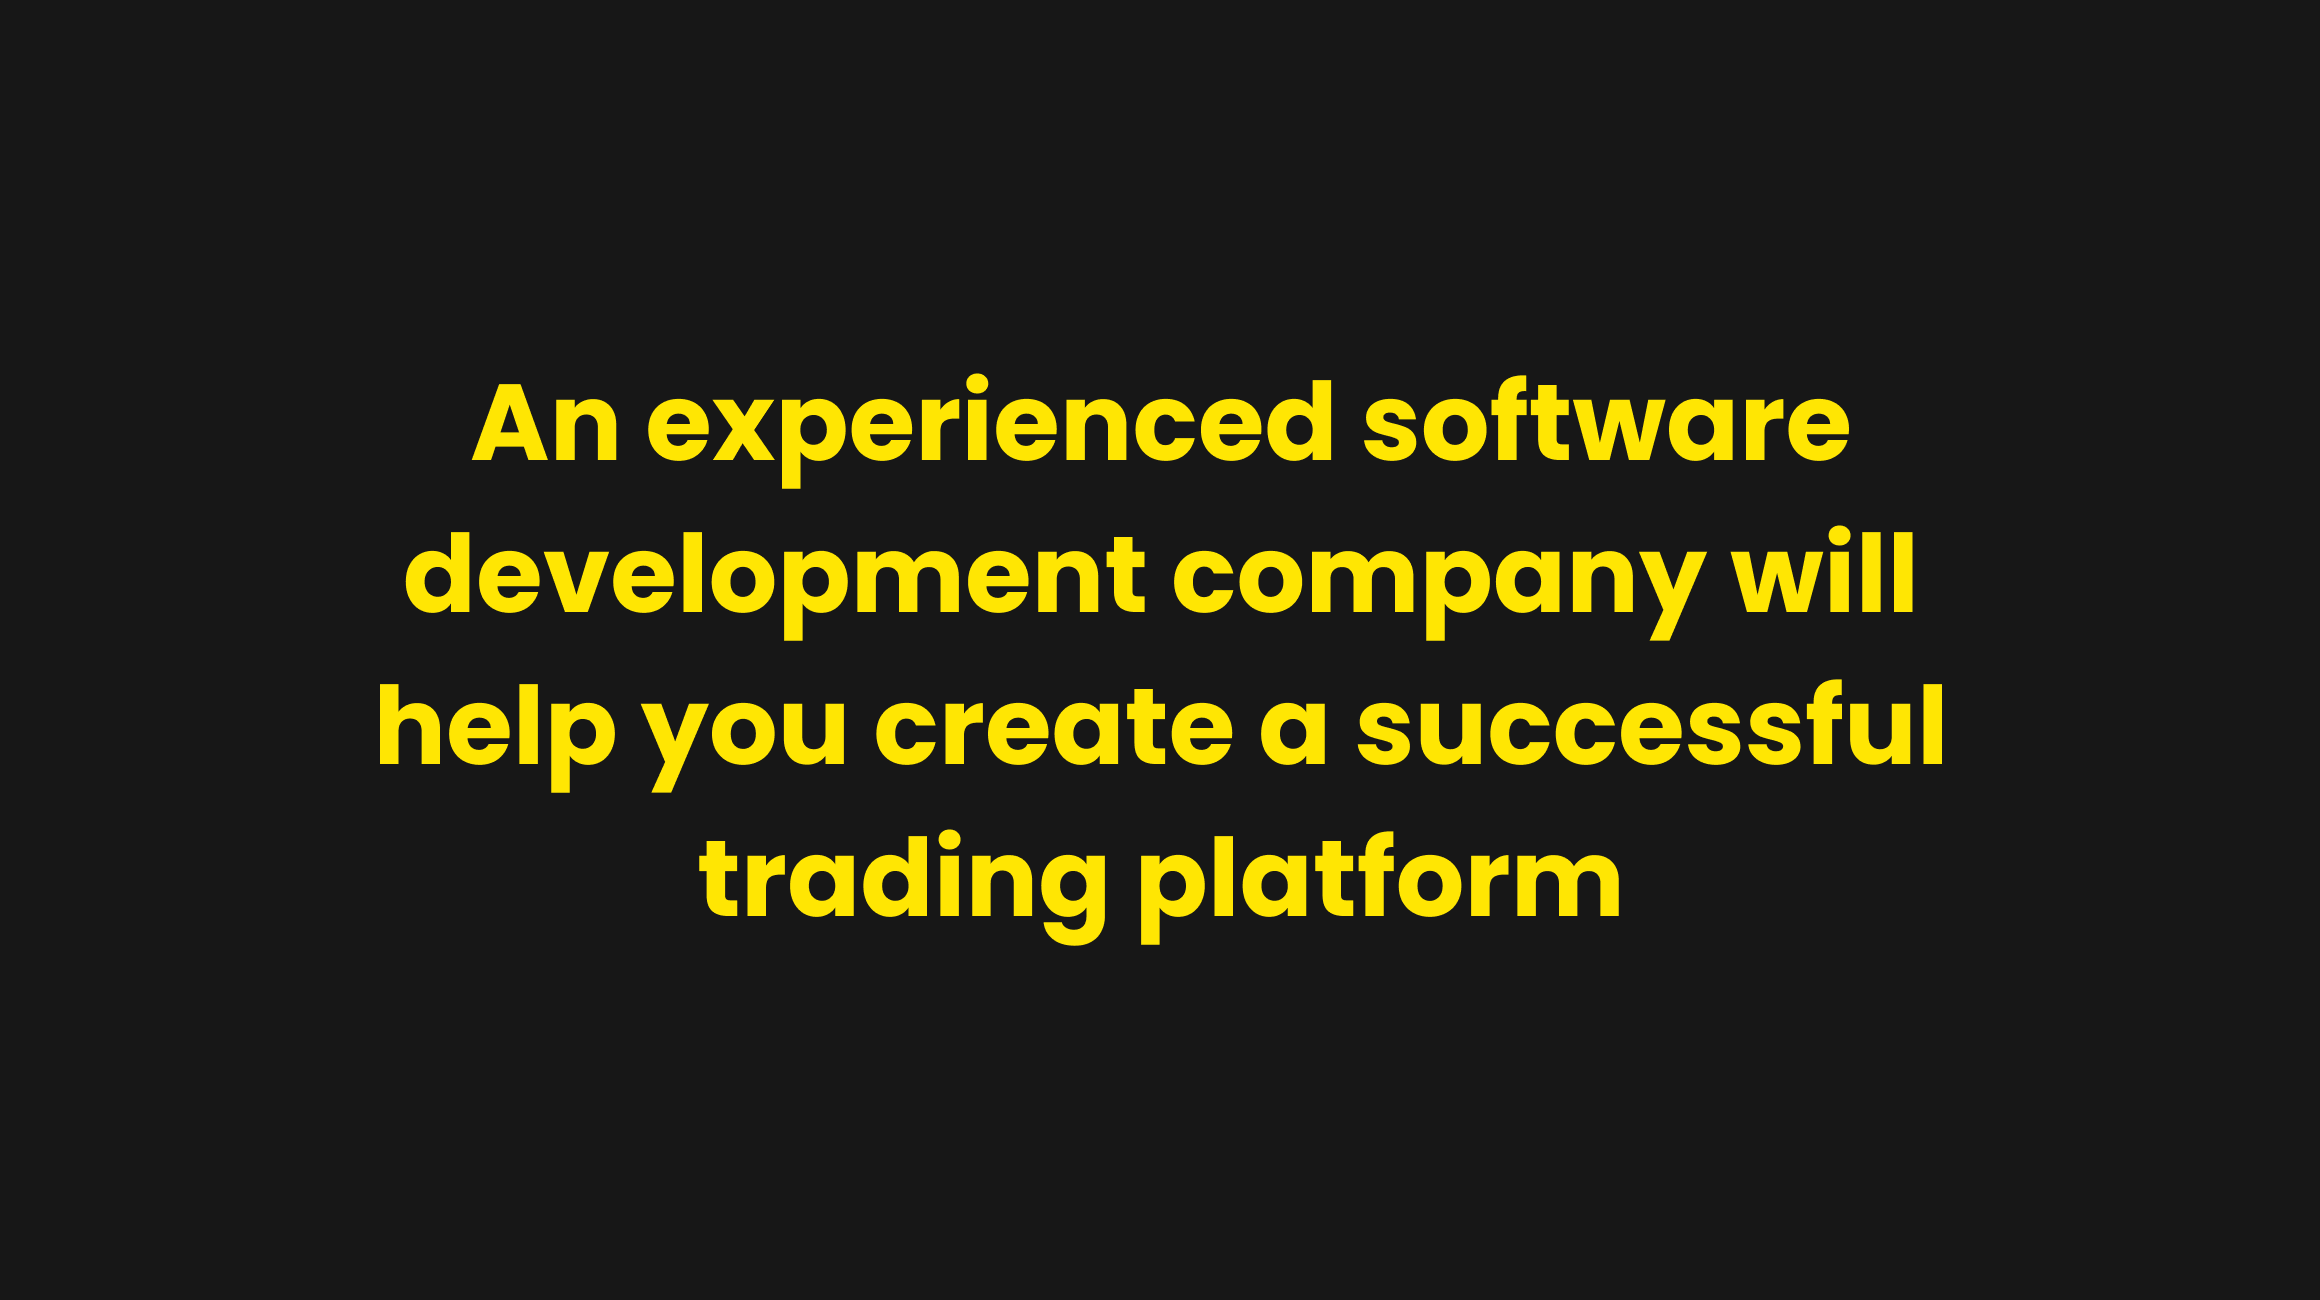 An experienced software development company will help you create a successful trading platform